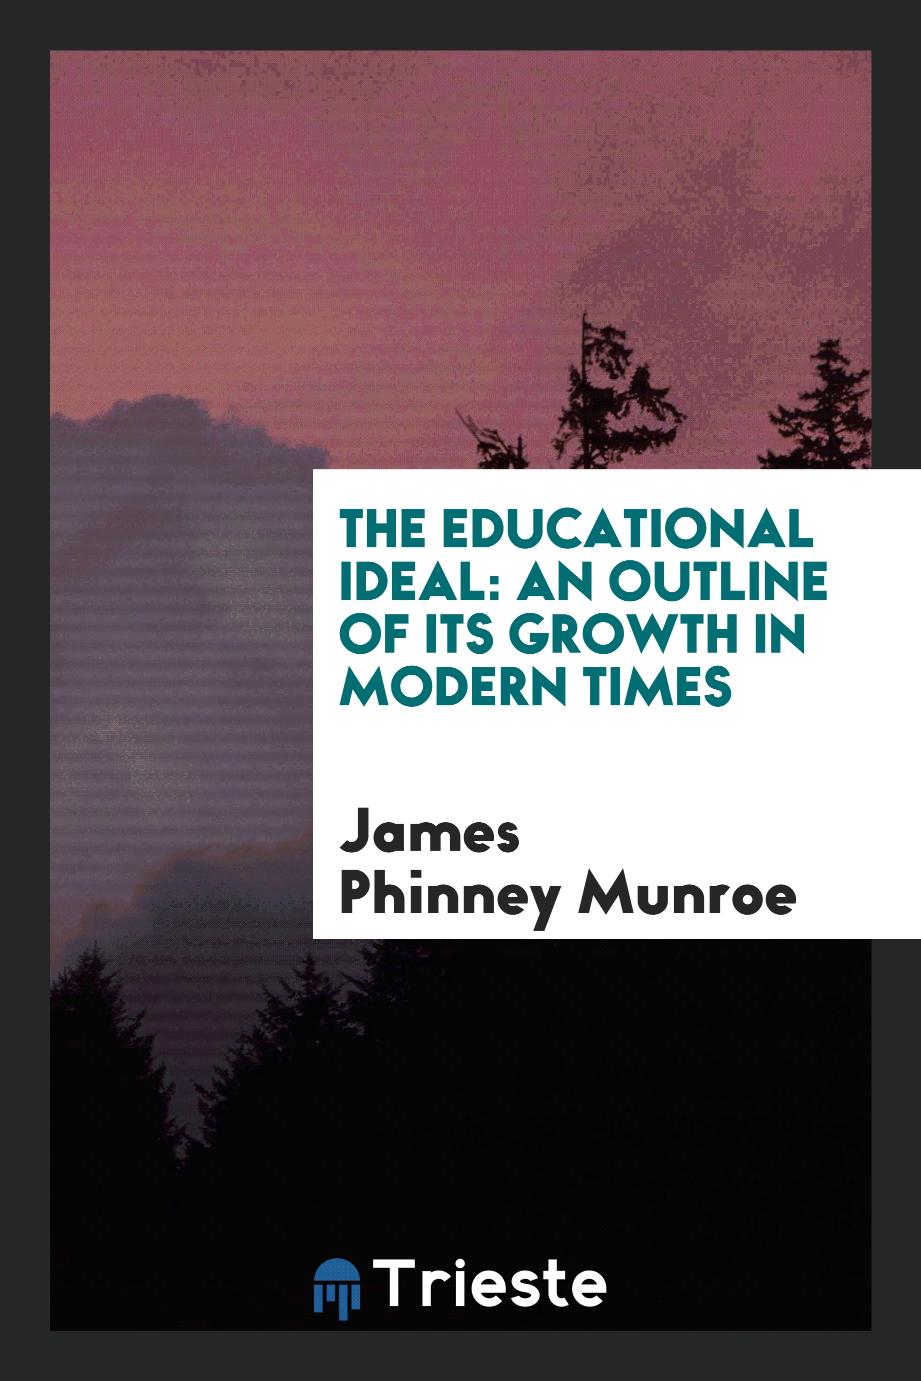 James Phinney Munroe - The Educational Ideal: An Outline of Its Growth in Modern Times